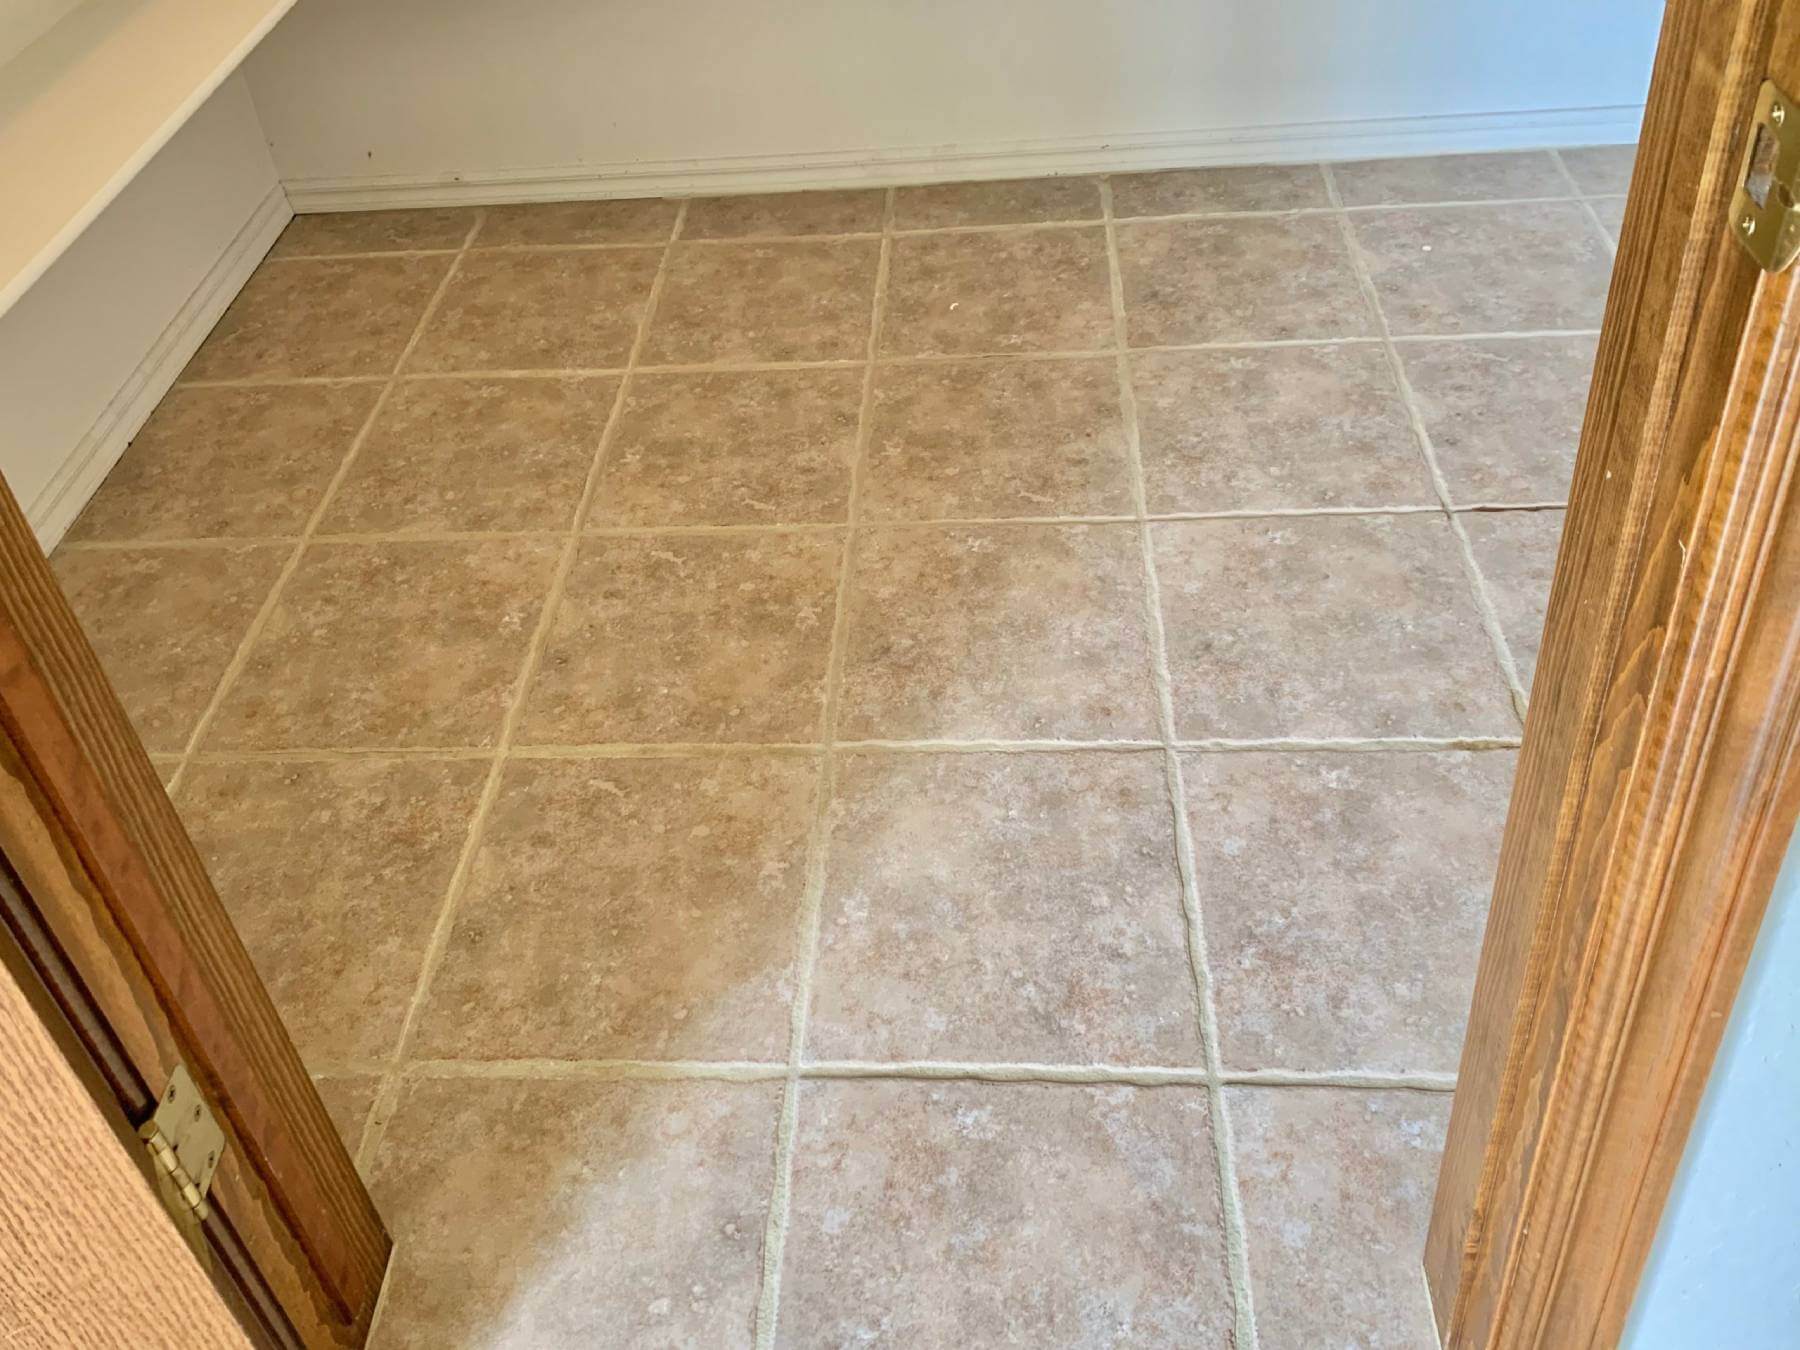 Tiles and Grout Cleaning